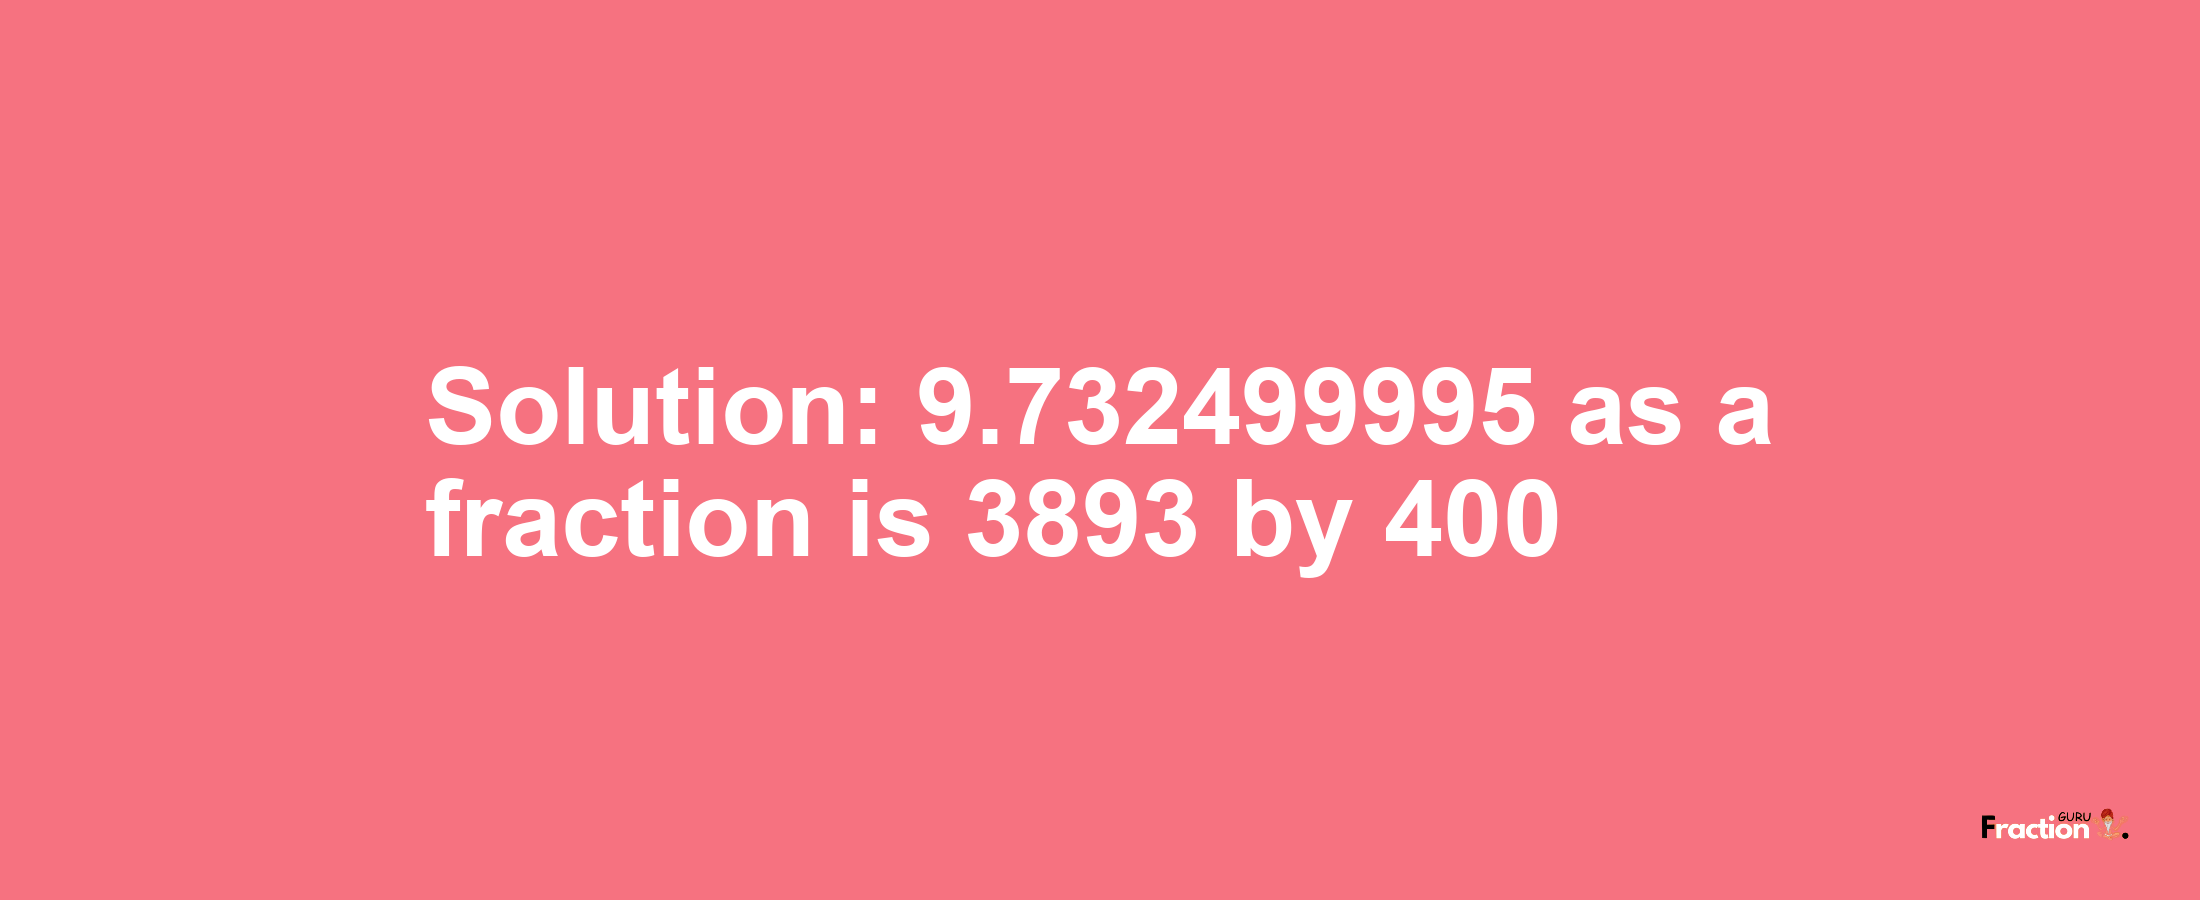 Solution:9.732499995 as a fraction is 3893/400